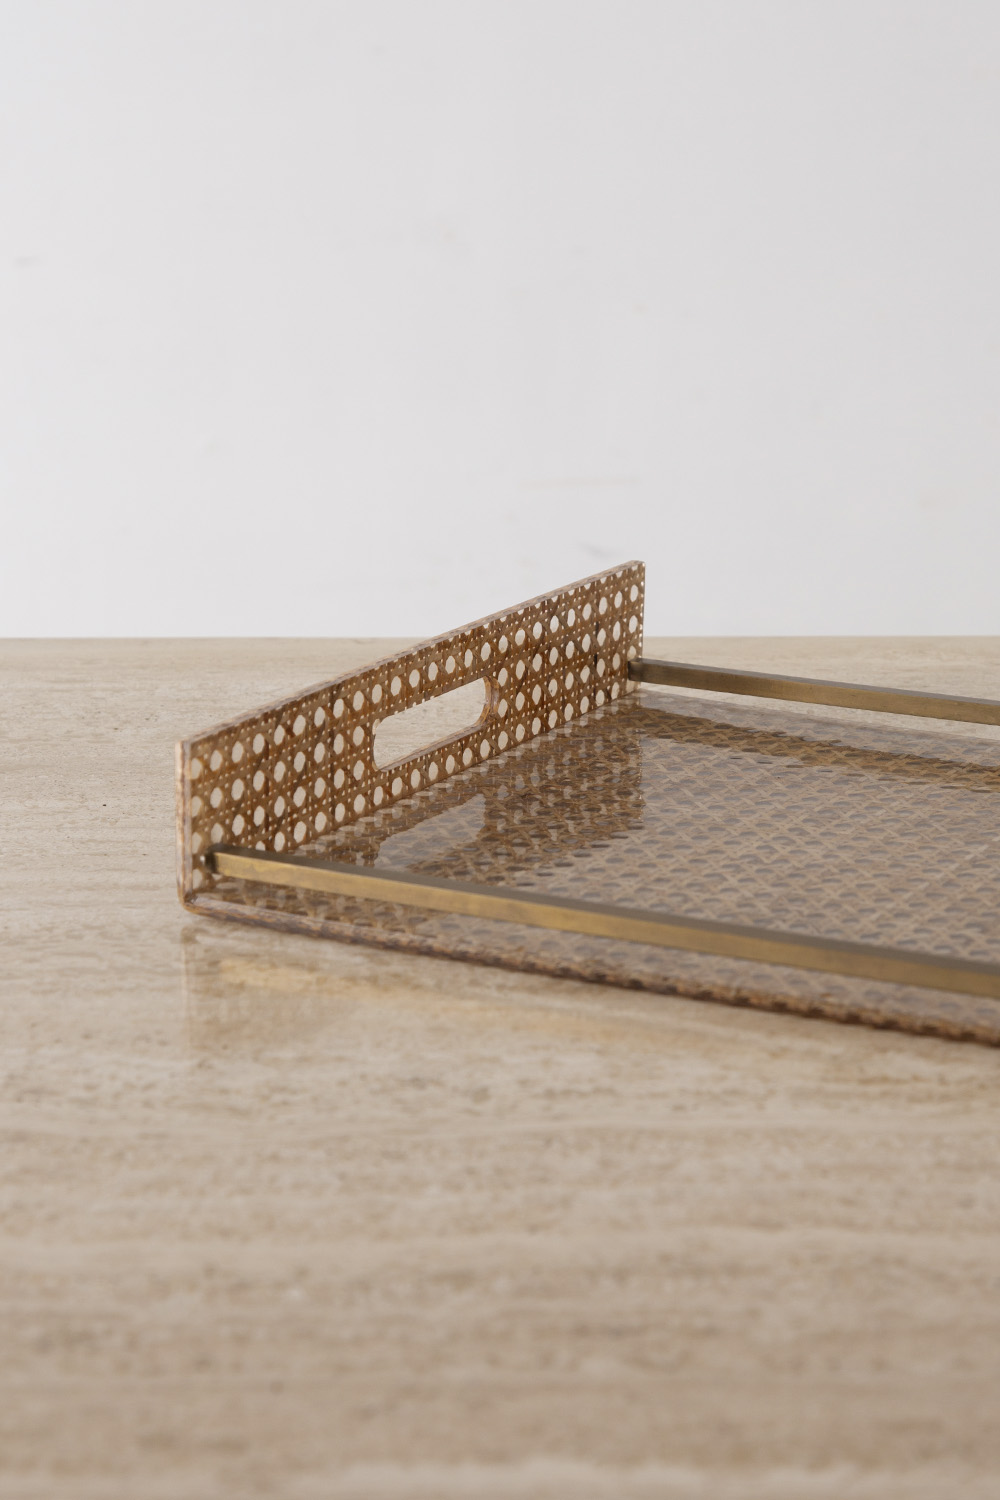 Serving Tray for Christian Dior in Brass , Rattan and Acrylic